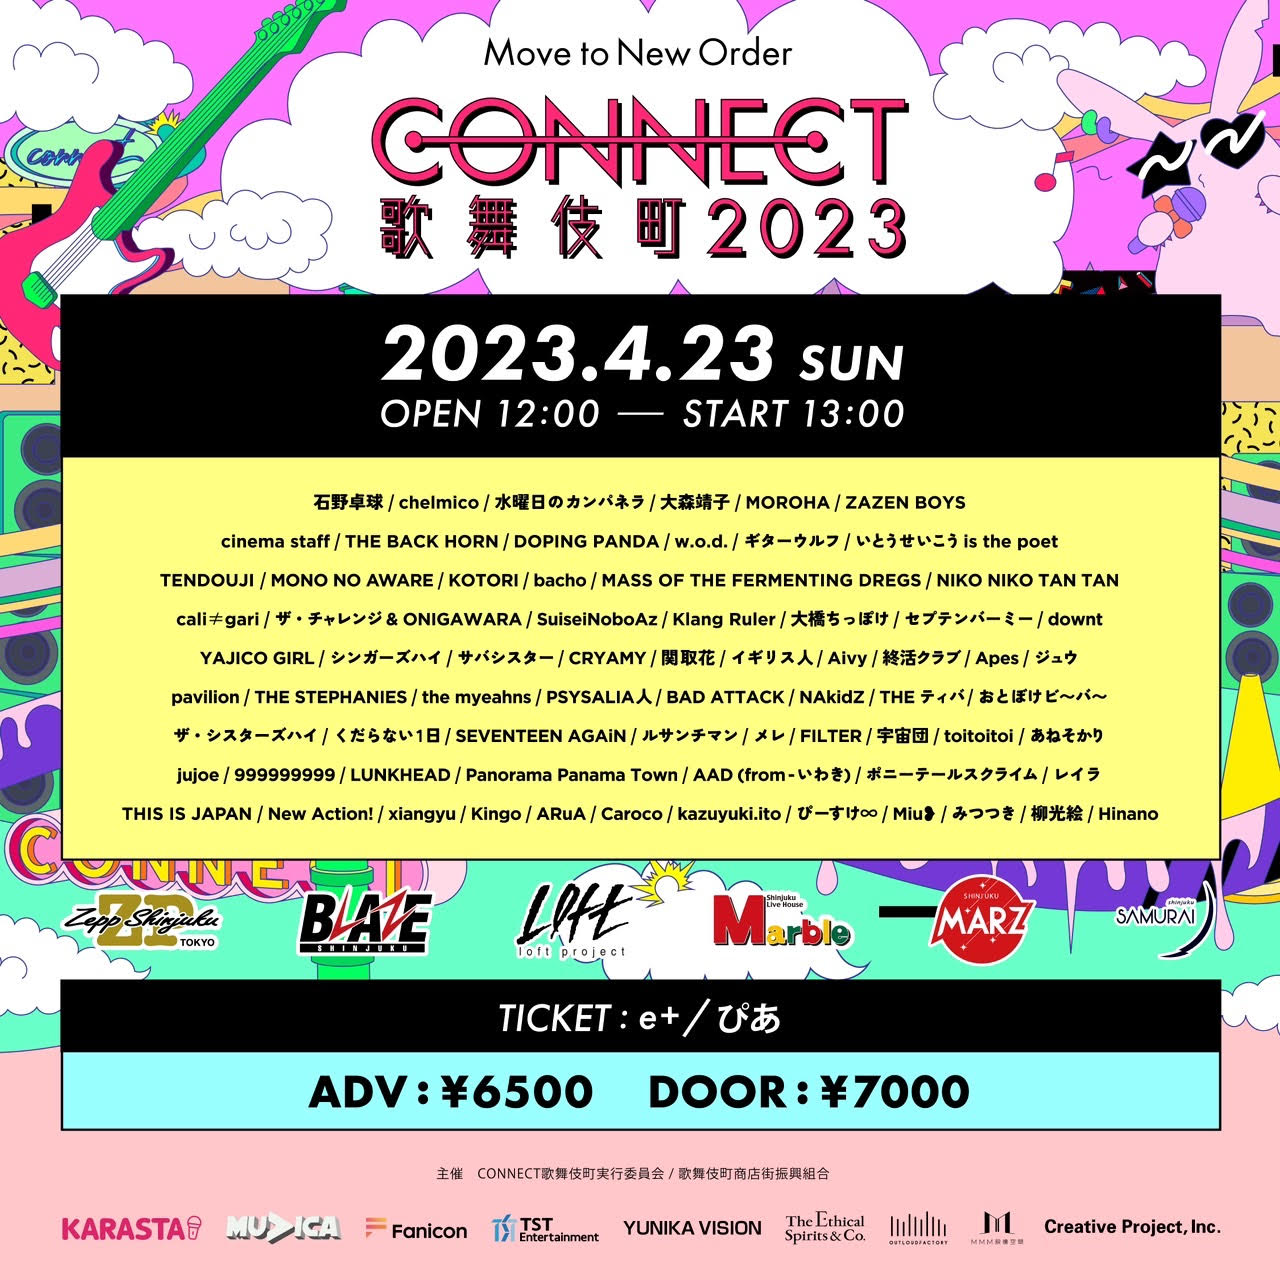 CONNECT歌舞伎町2023 Move to New Order